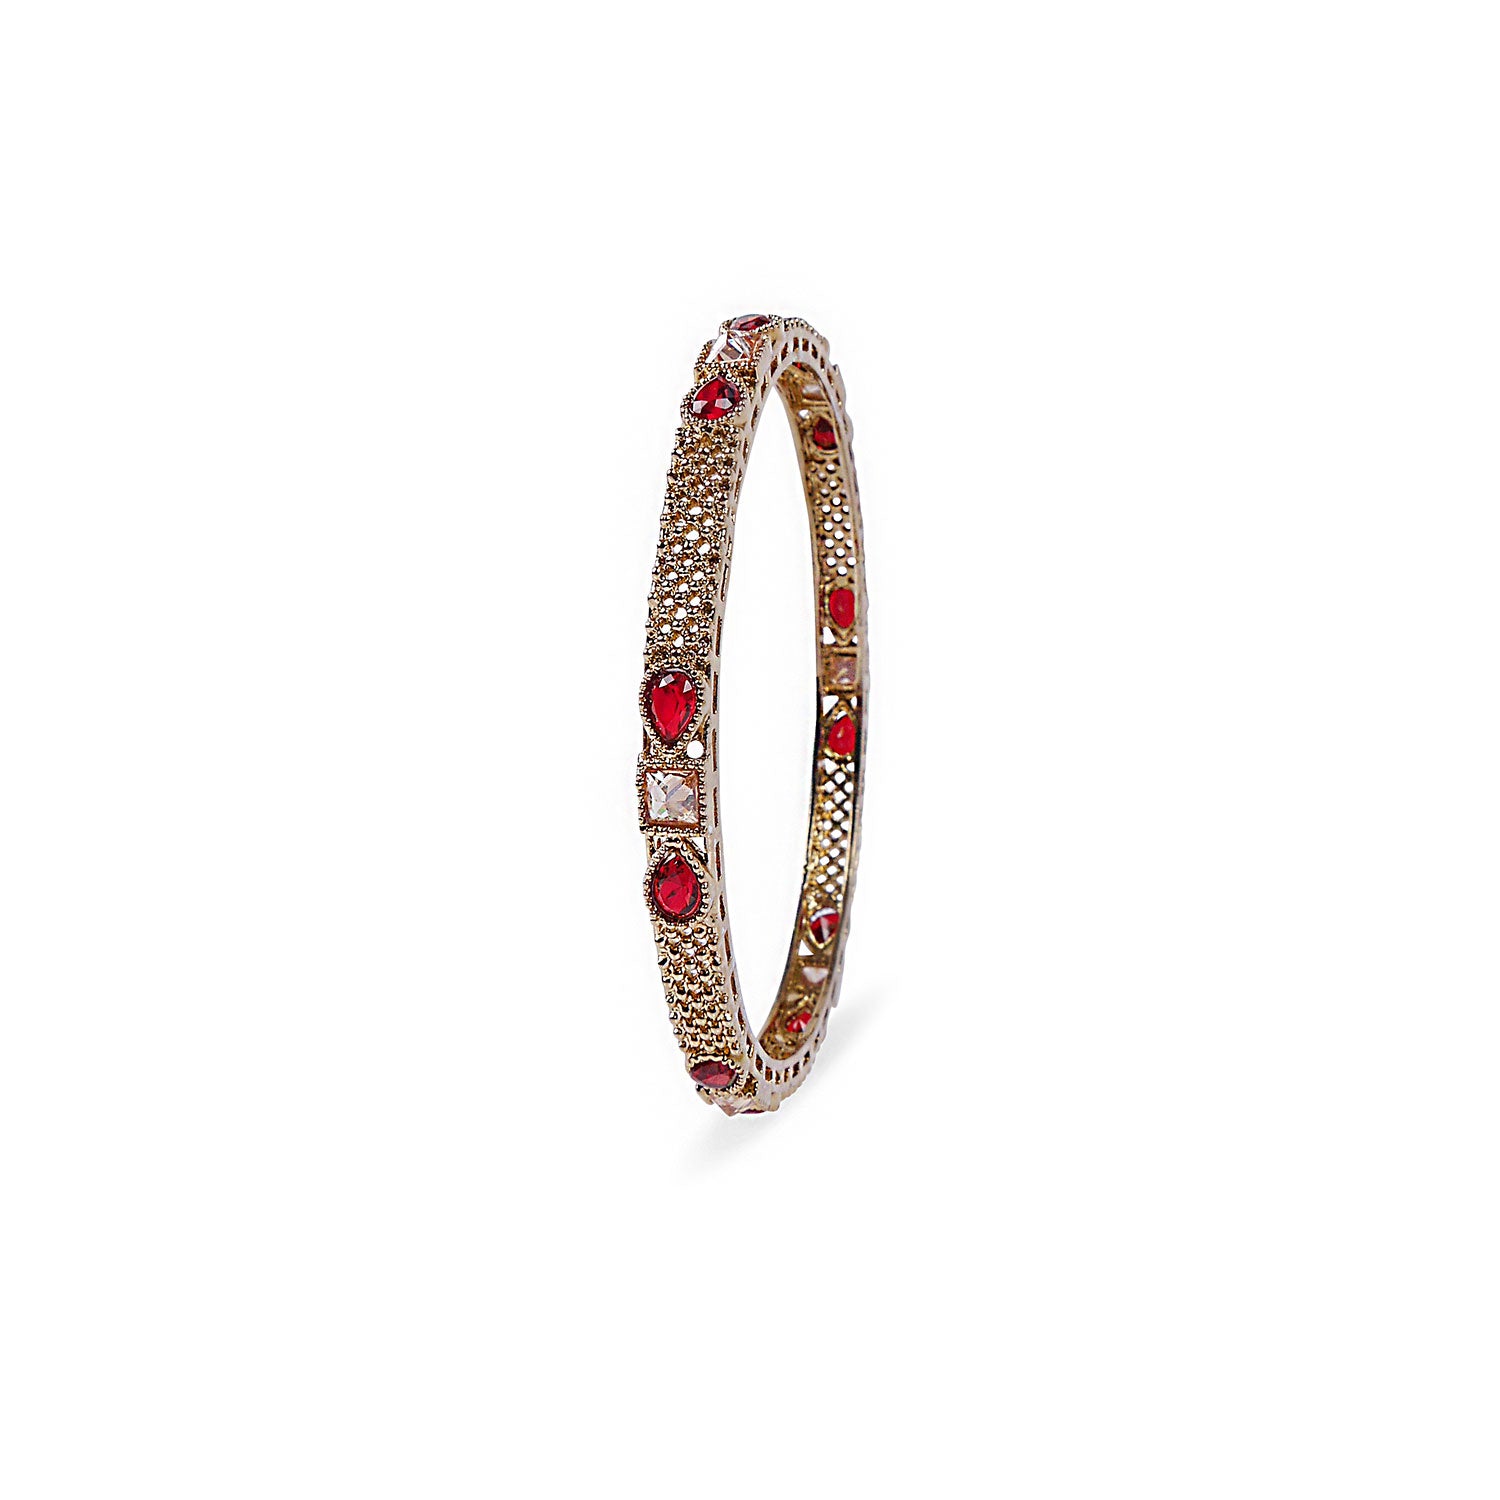 INDIAN BANGLE WITH MAROON CRYSTALS